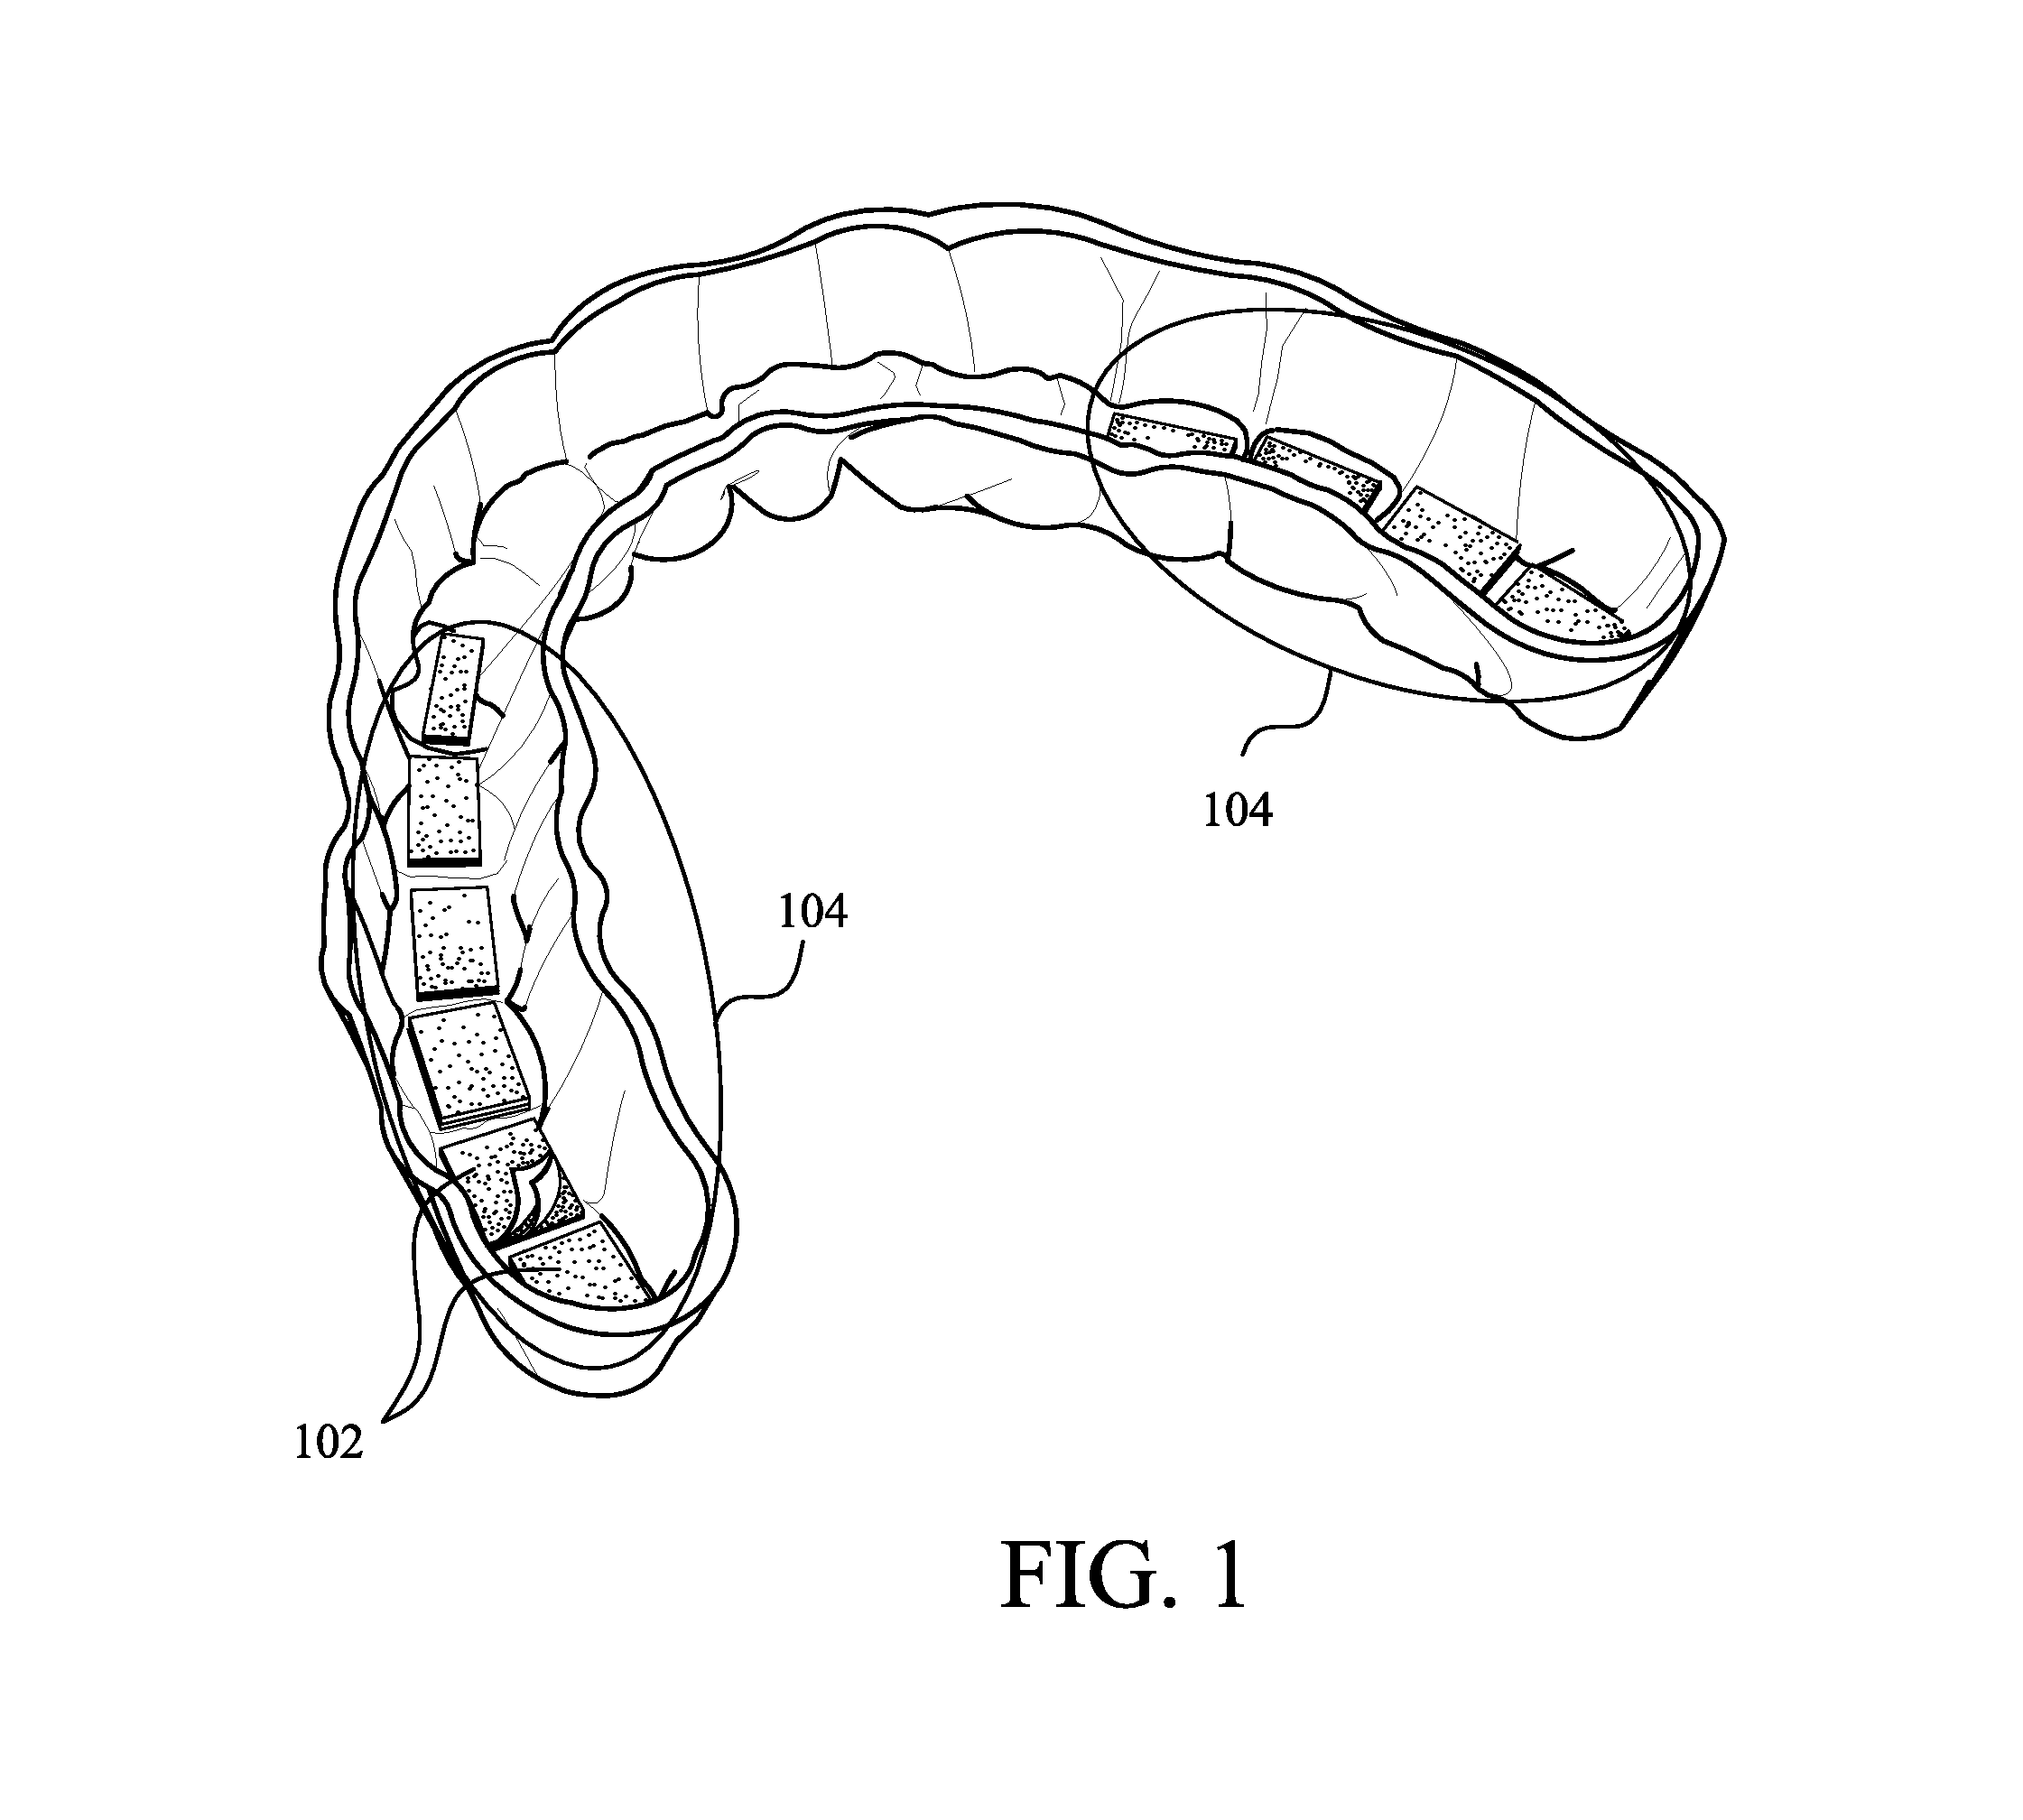 Methods and devices for monitoring bruxism and/or sleep apnea and alleviating associated conditions